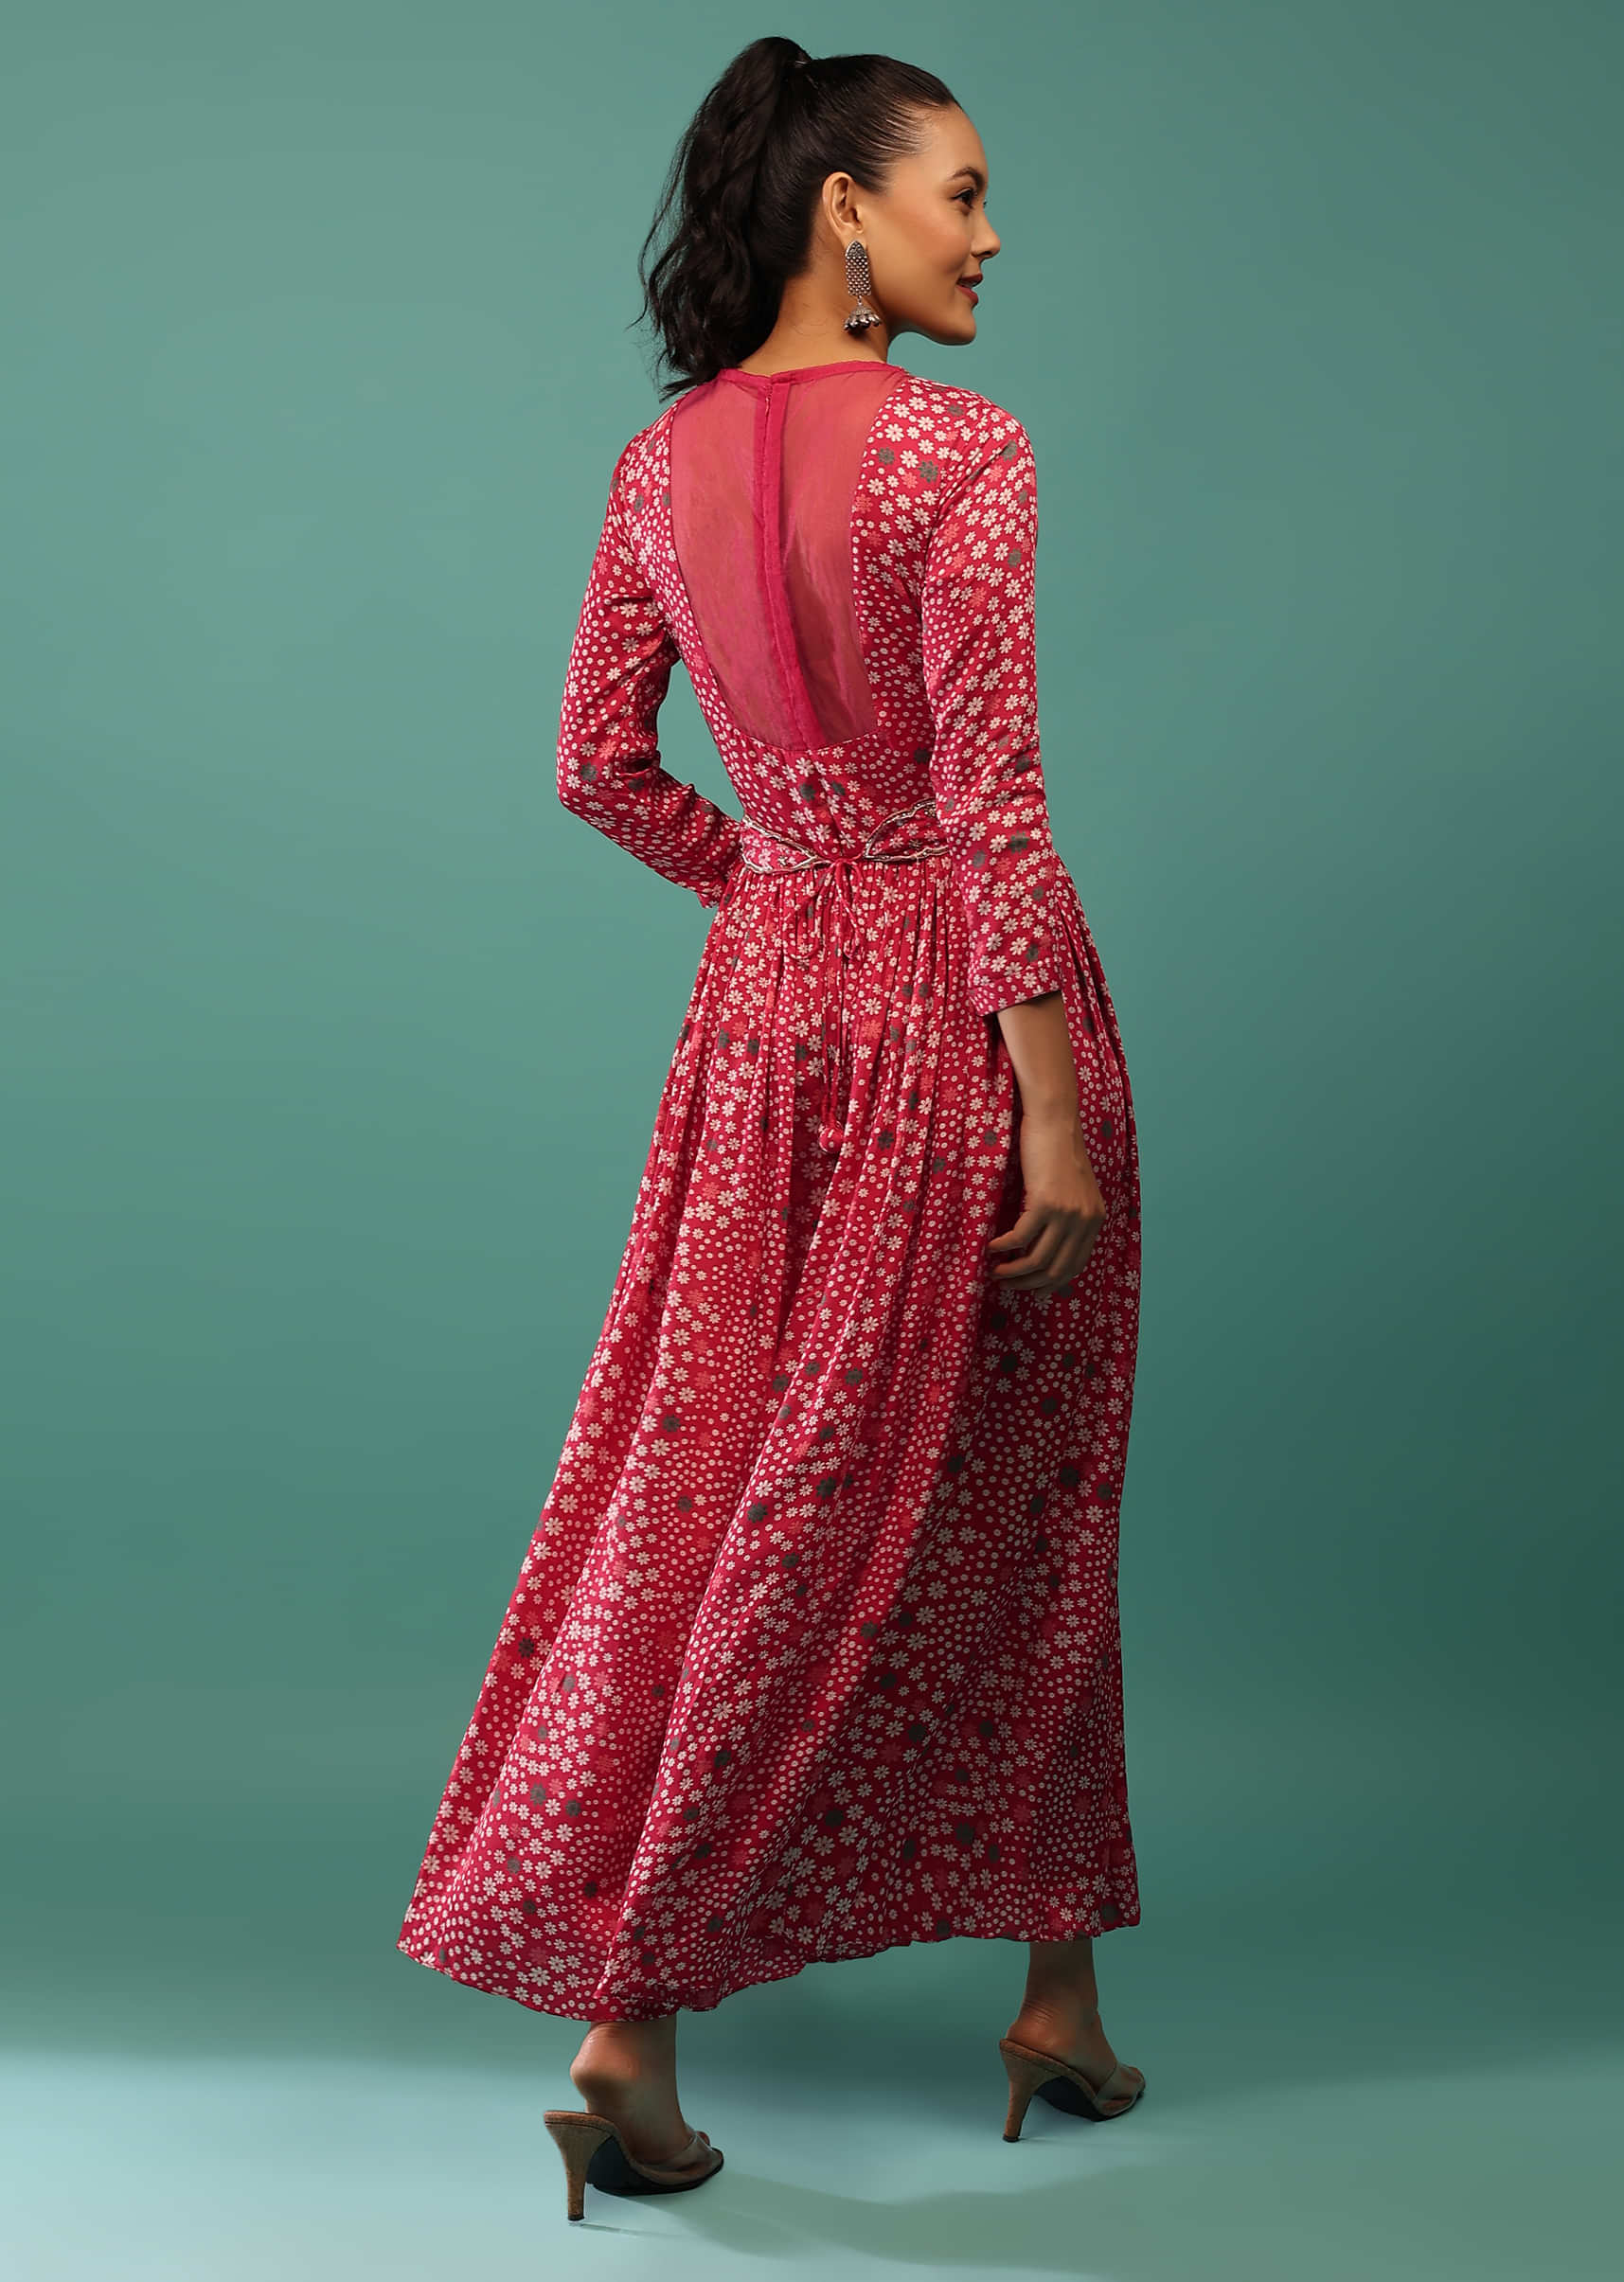 Pink Satin Silk Jumpsuit With Floral Prints And Waist Belt